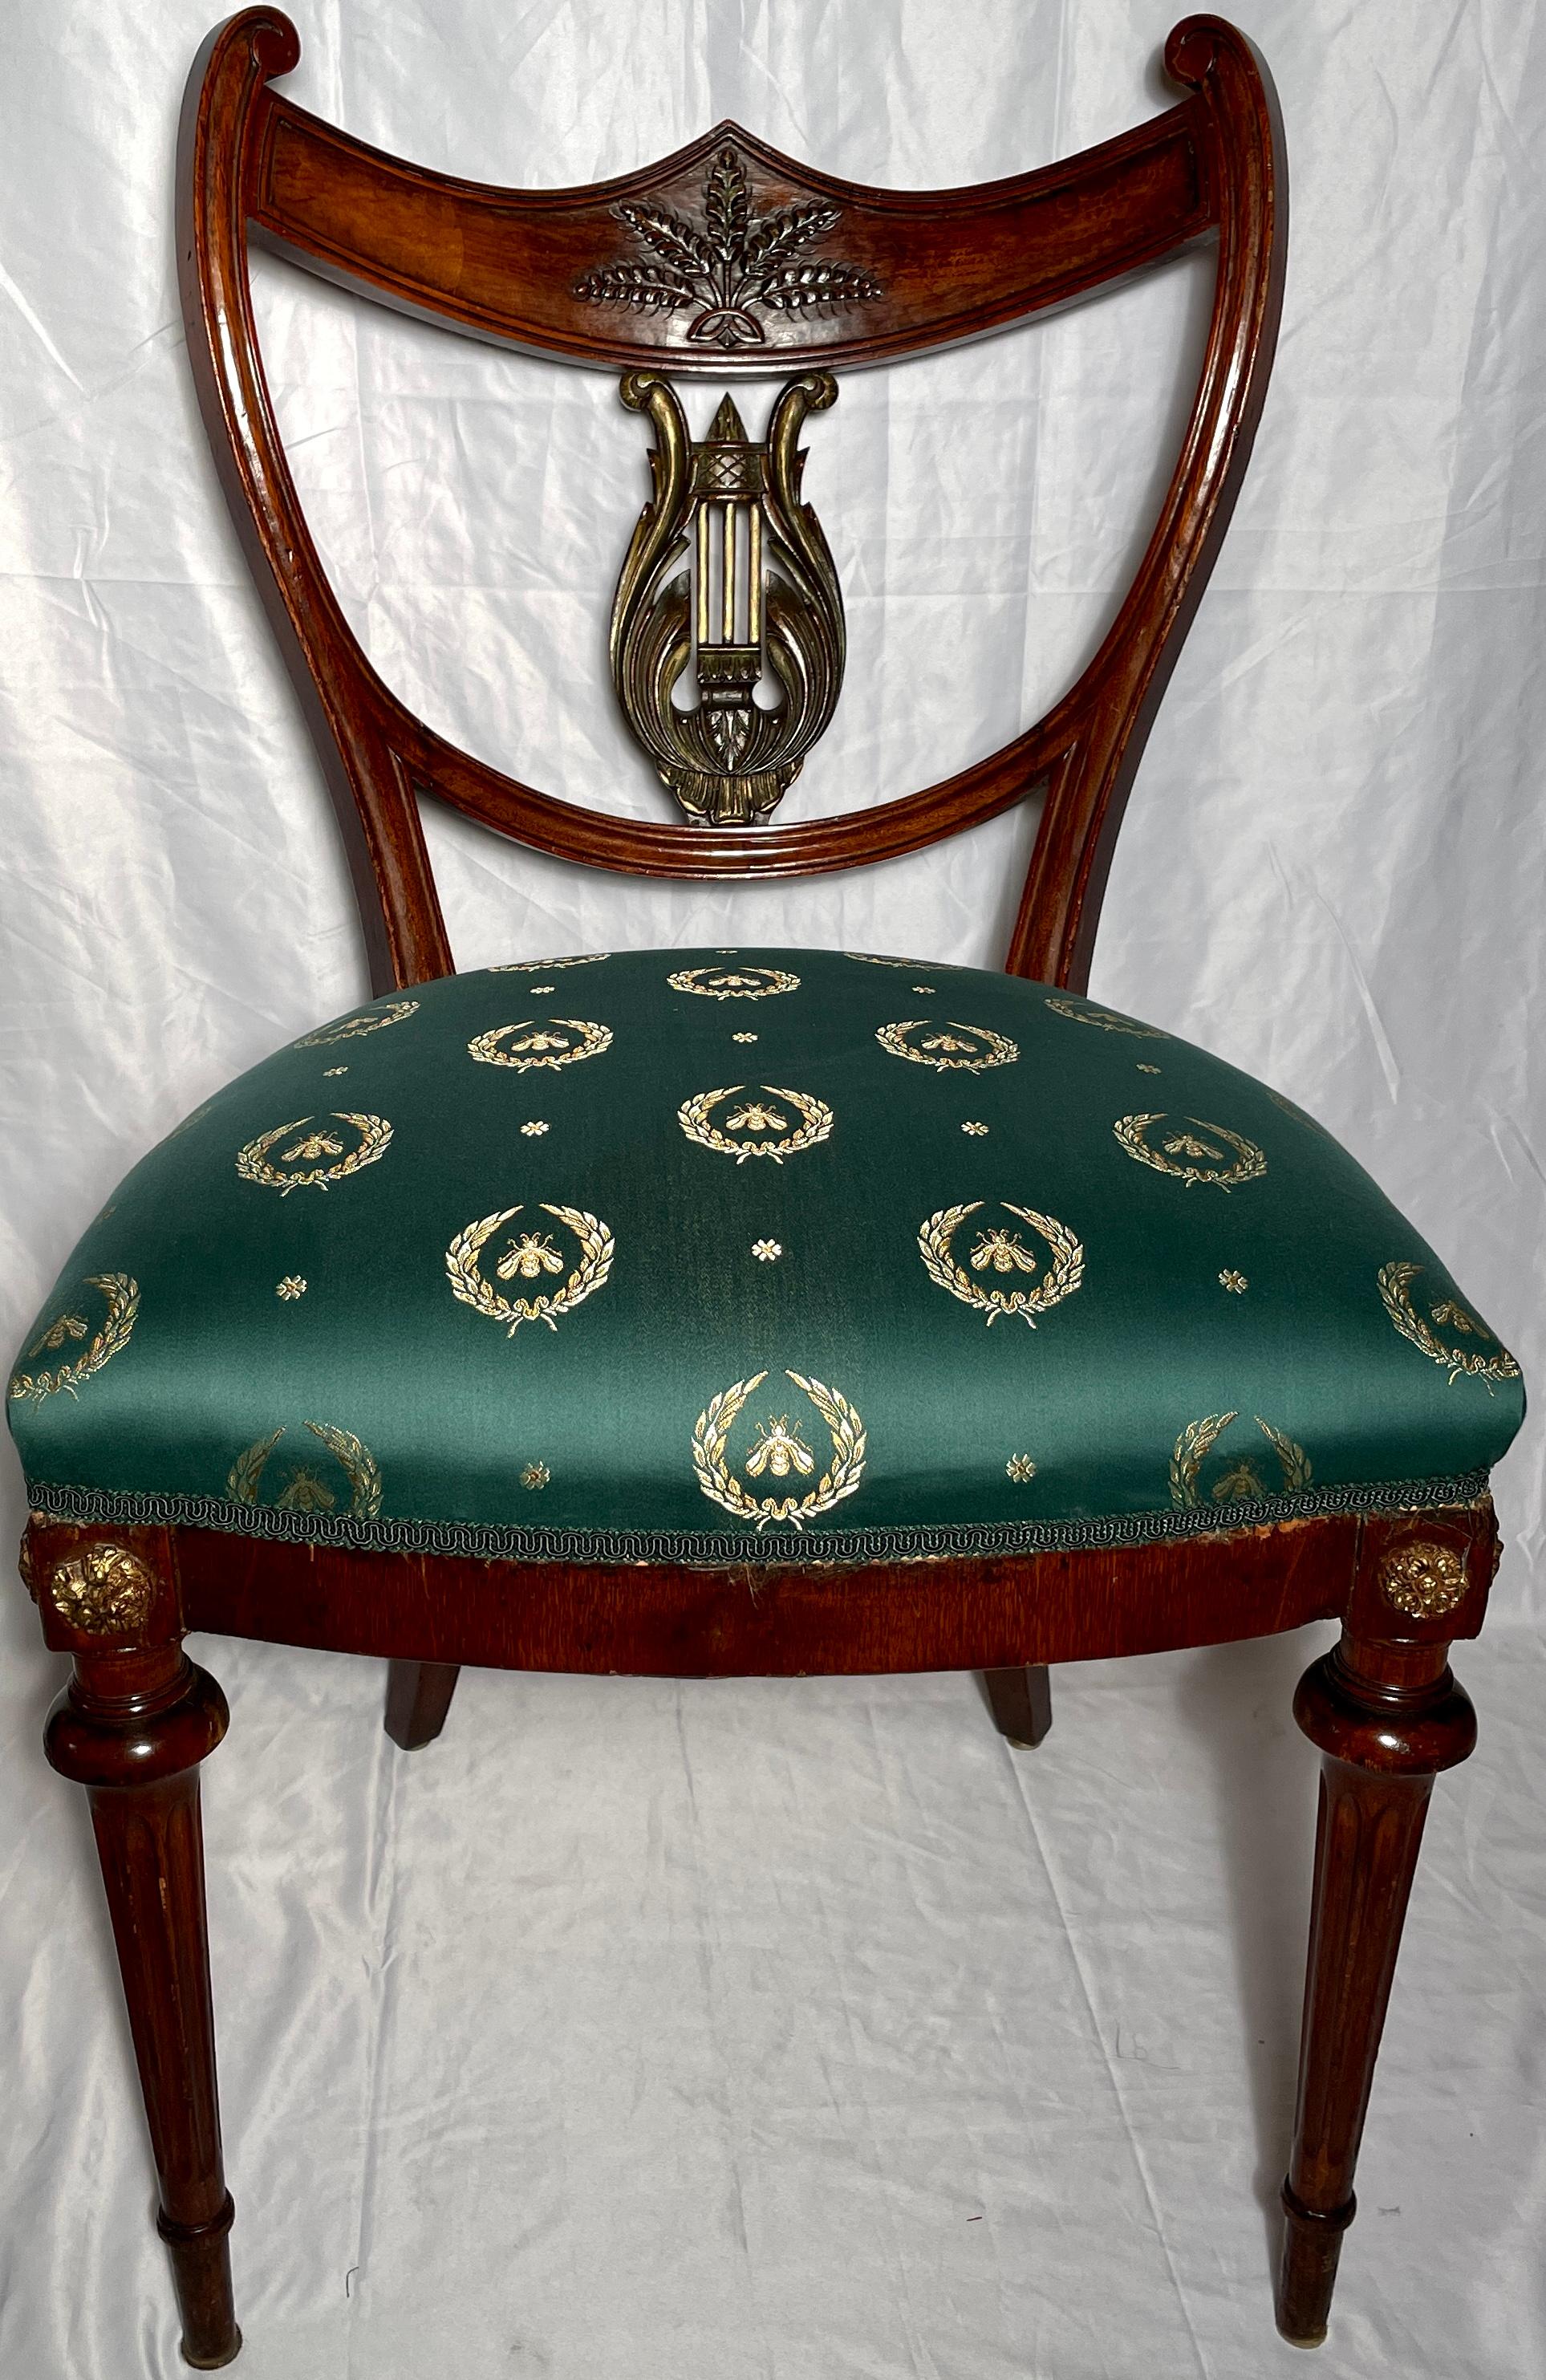 Pair antique English Regency mahogany chairs, circa 1820-1830. 
Upholstered in emerald green and gold silk fabric.